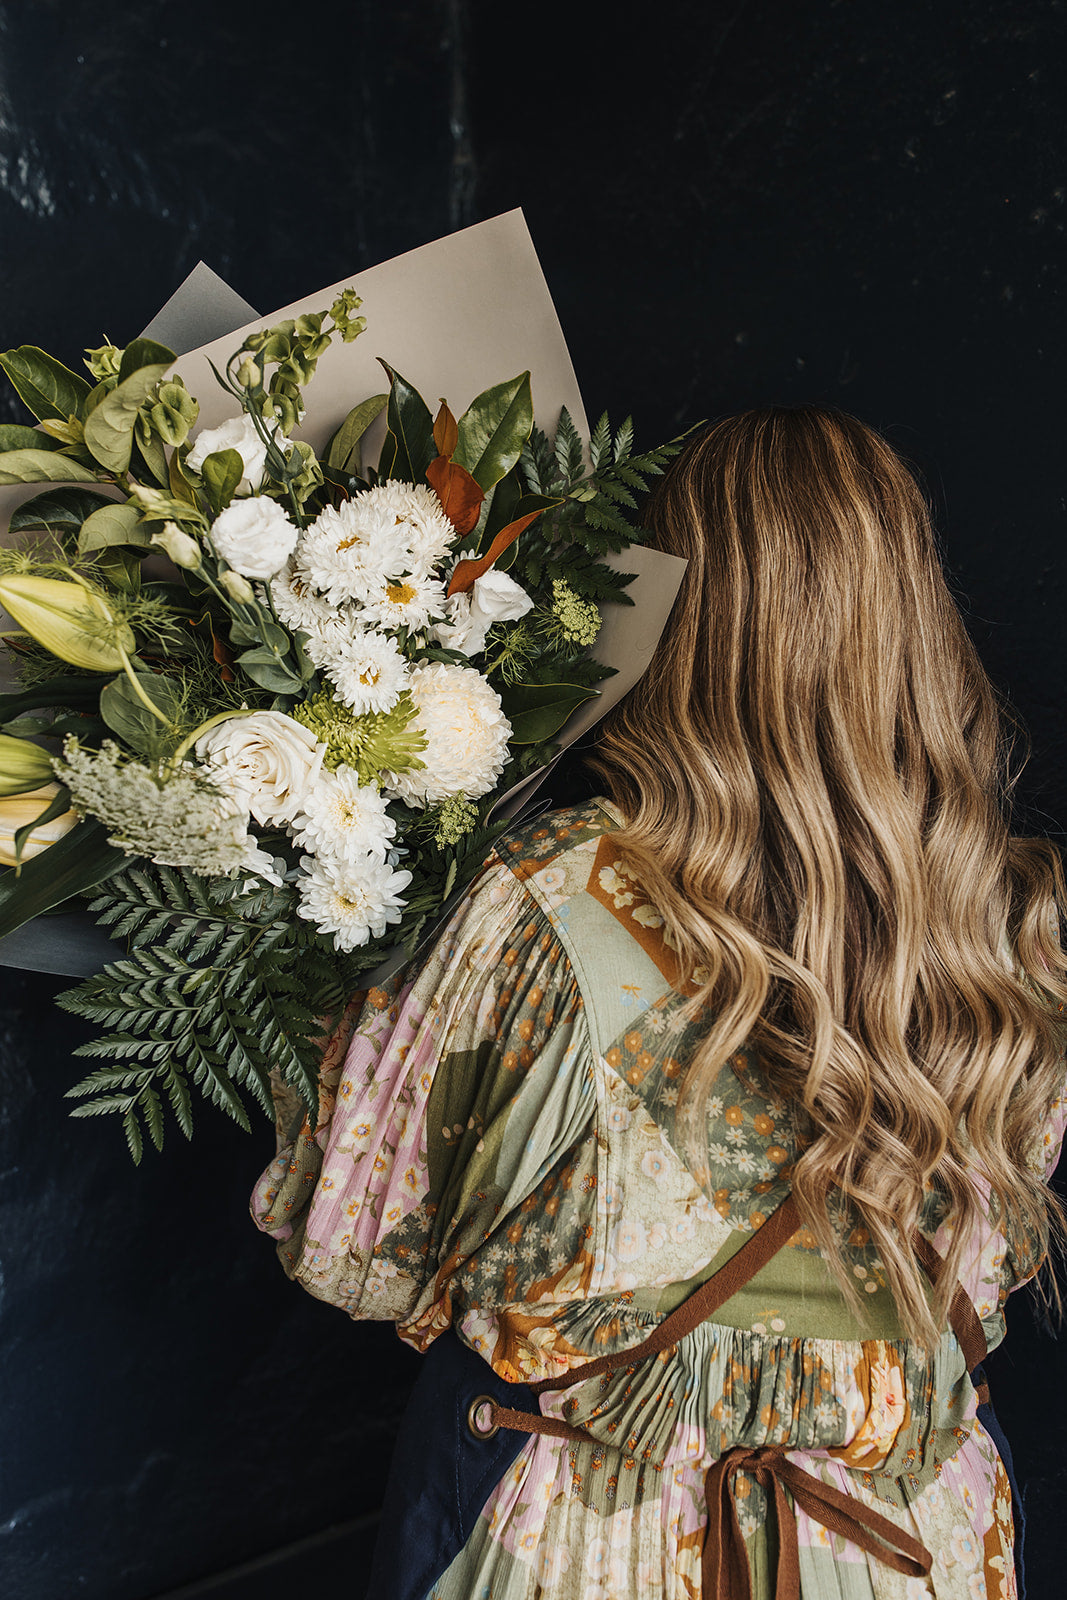 Bouquet of neutral tone flowers being held over the shoulder by a woman with long blonde hair. Clare florist that offers local delivery.